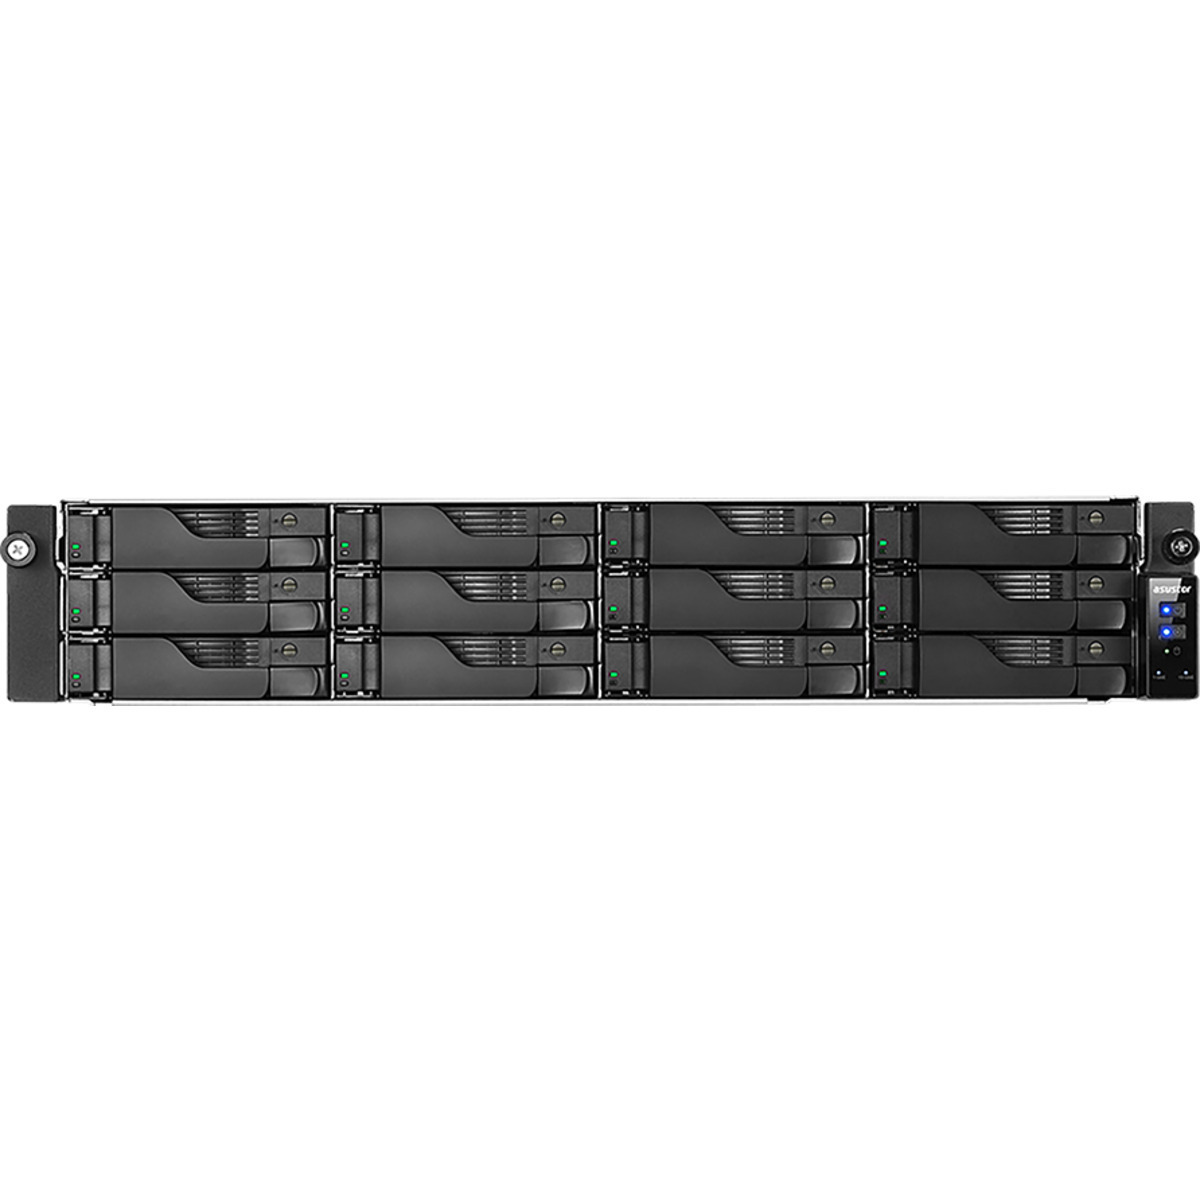 ASUSTOR LOCKERSTOR 12RD AS6512RD 110tb 12-Bay RackMount Multimedia / Power User / Business NAS - Network Attached Storage Device 11x10tb Seagate IronWolf ST10000VN000 3.5 7200rpm SATA 6Gb/s HDD NAS Class Drives Installed - Burn-In Tested - FREE RAM UPGRADE LOCKERSTOR 12RD AS6512RD